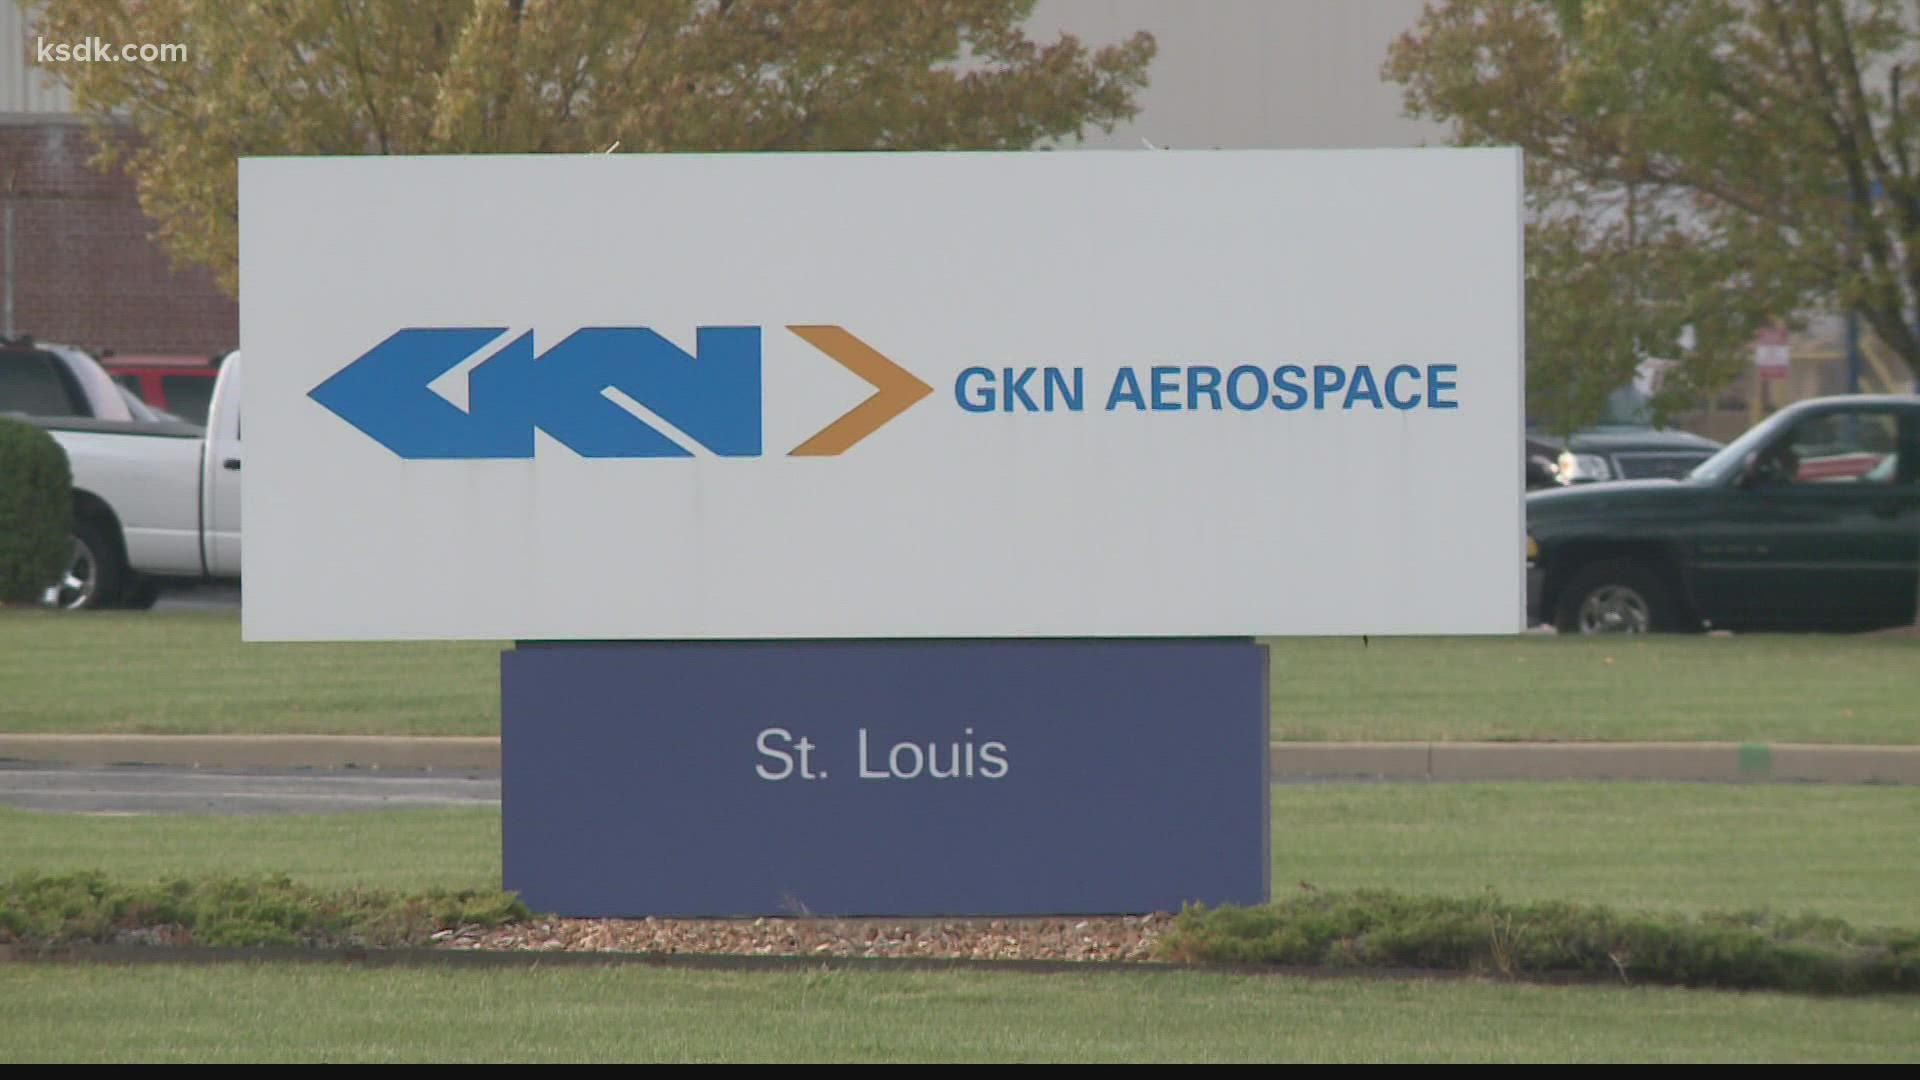 GKN Aerospace is a maker of metallics materials for aircraft. The aerospace manufacturer said Thursday it would close its Hazelwood plant by the end of 2023.